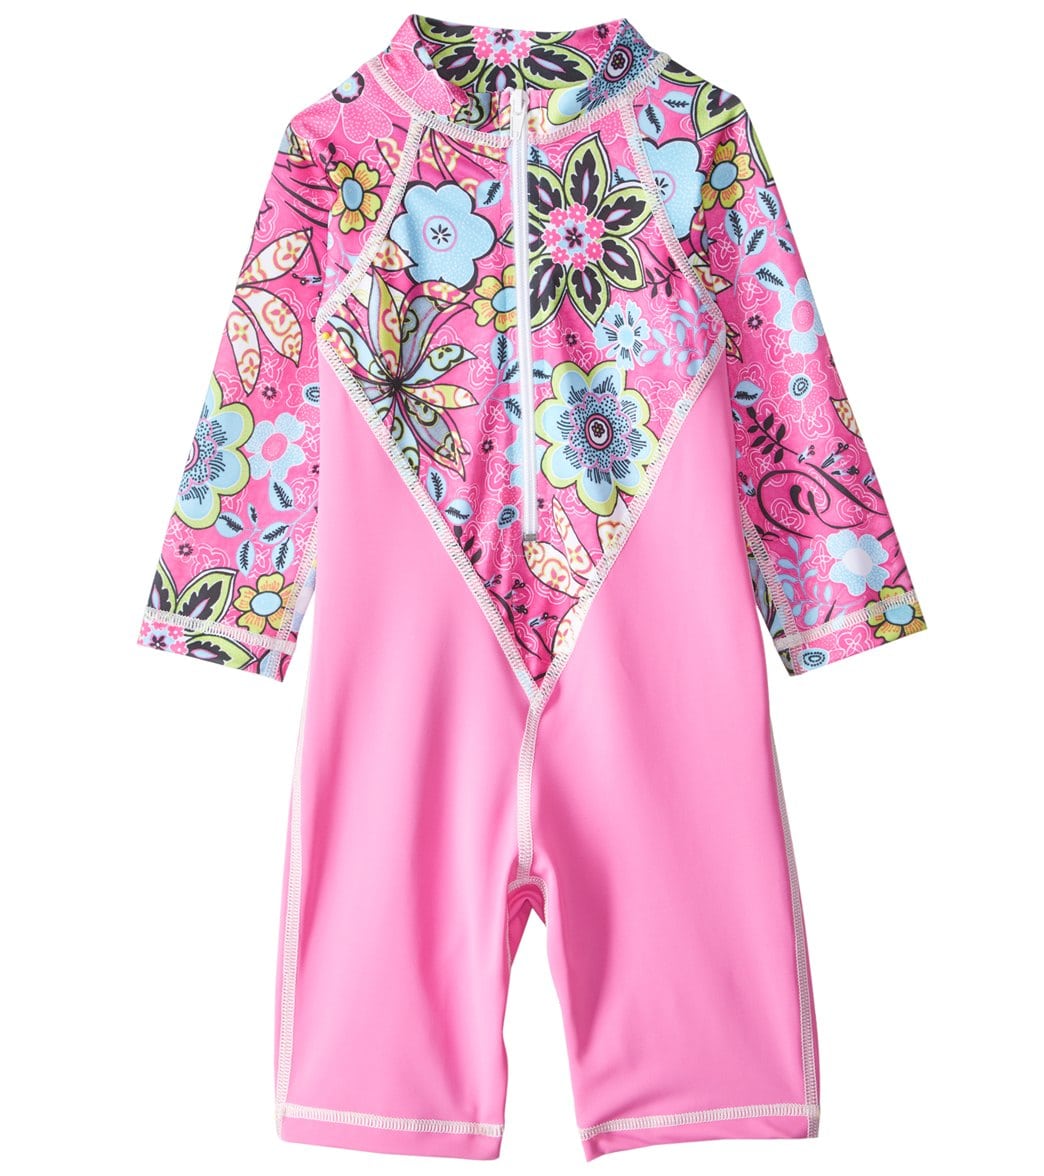 Tidepools Girls' Topsy Turvy Uv 50+ Suit Baby - Pink Medium 6-12 Months Lycra®/Polyester - Swimoutlet.com